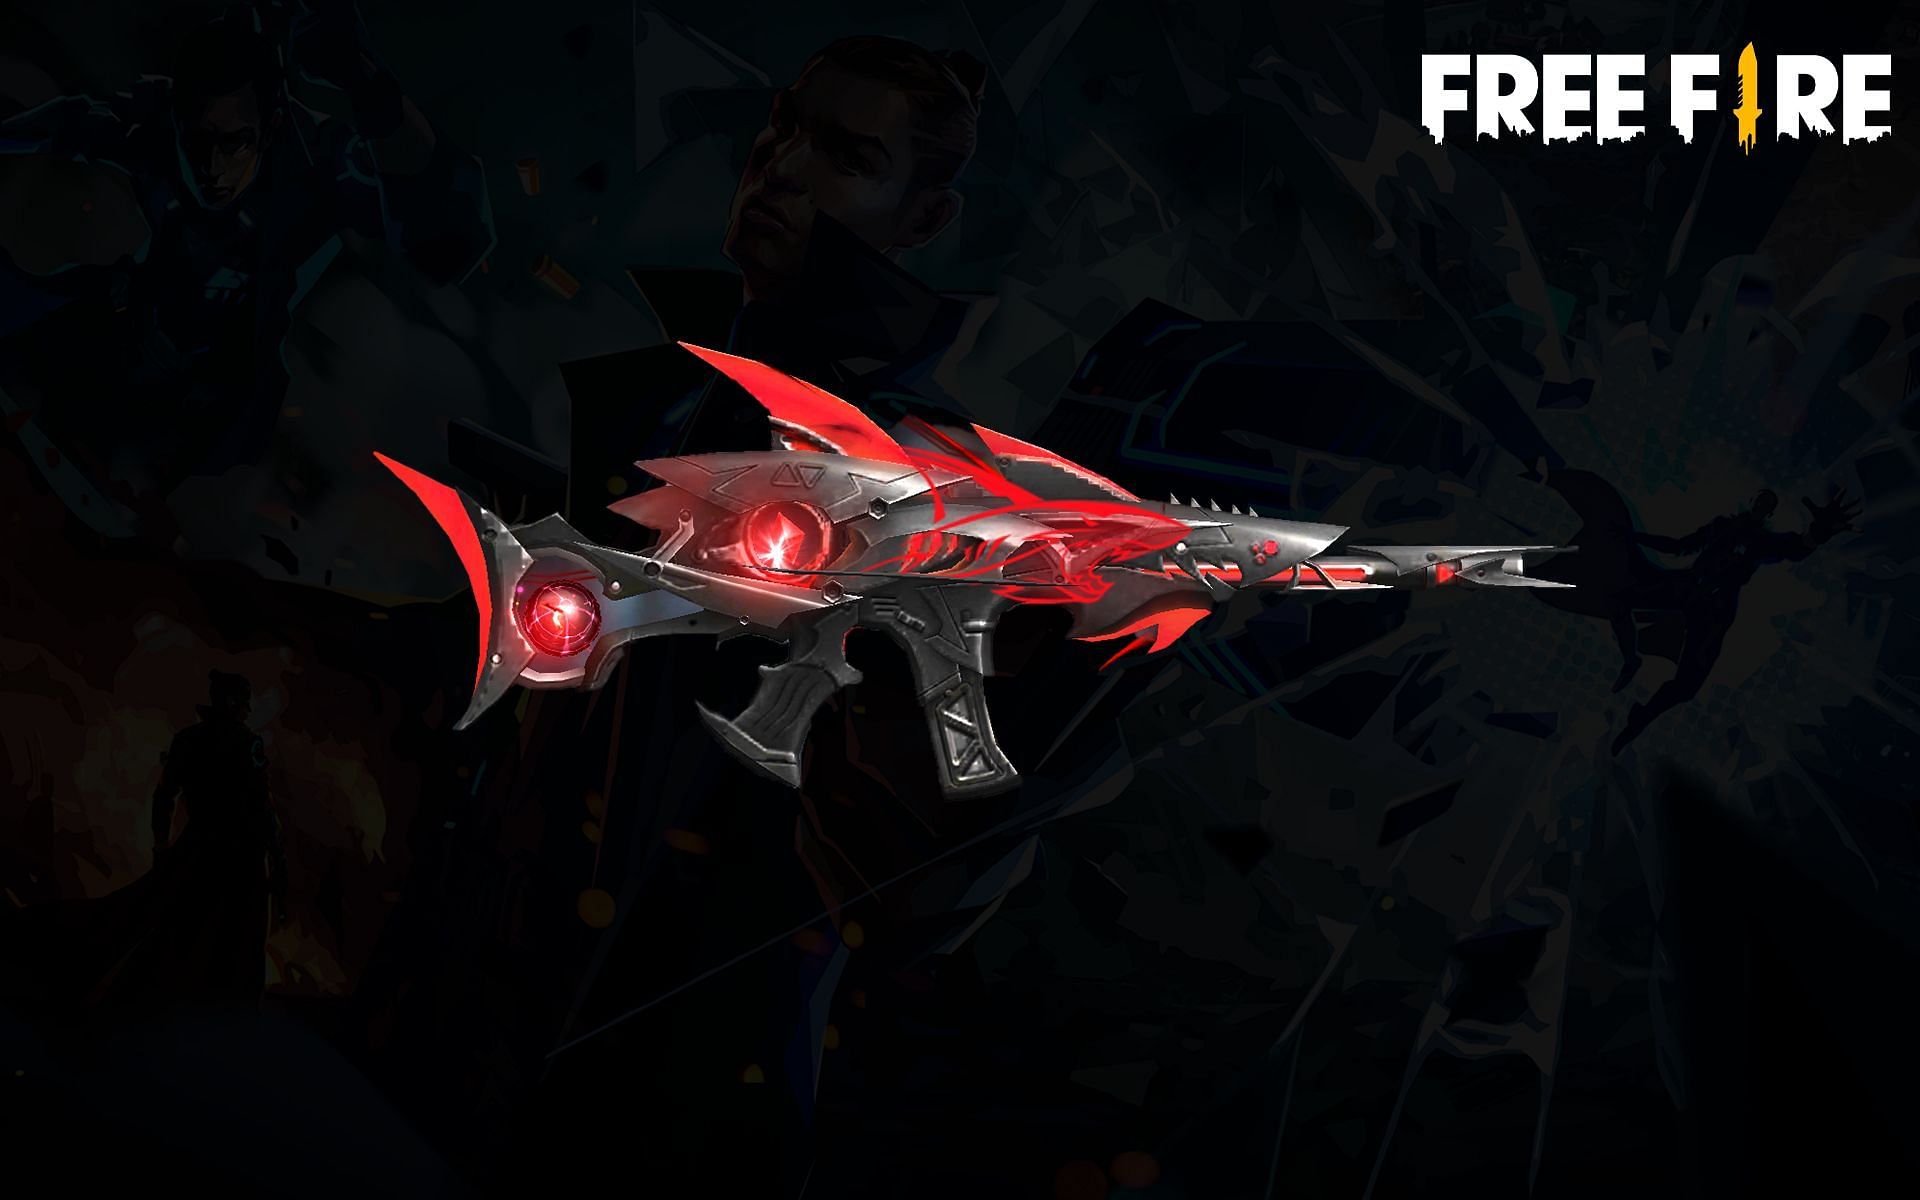 Megalodon Alpha Scar is now accessible in Free Fire (Image via Garena)